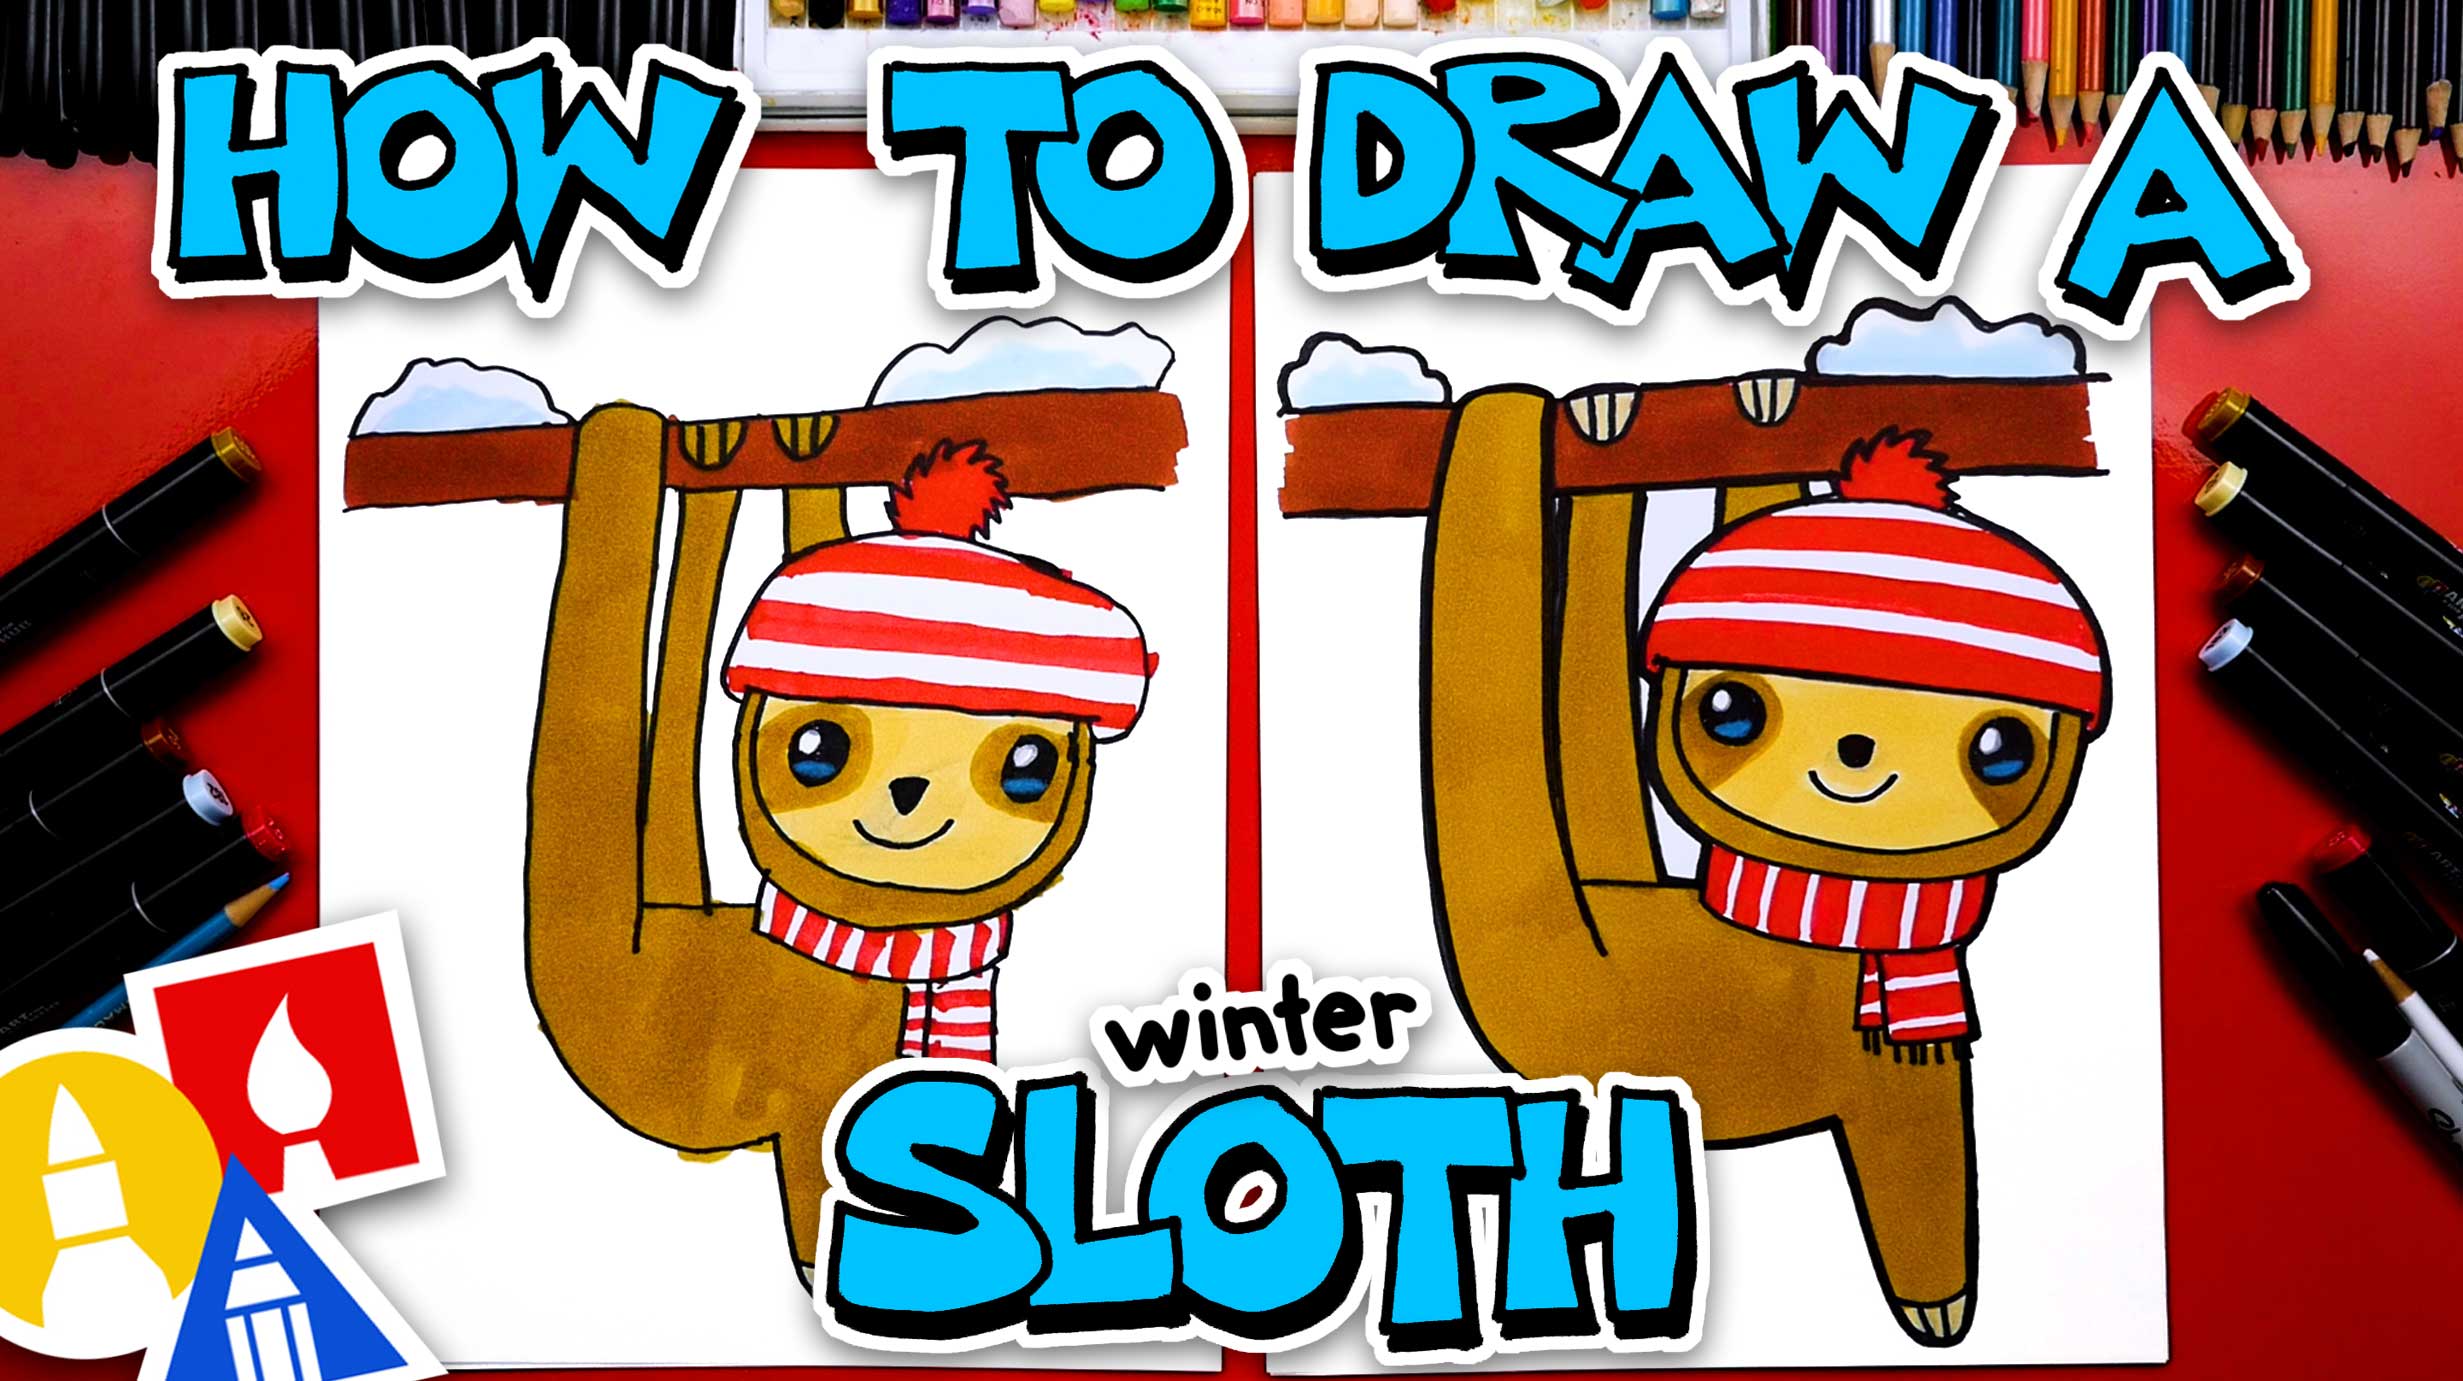 How to Draw a Sloth - Easy Drawing Tutorial For Kids | Easy doodles drawings,  Easy drawings, Drawings